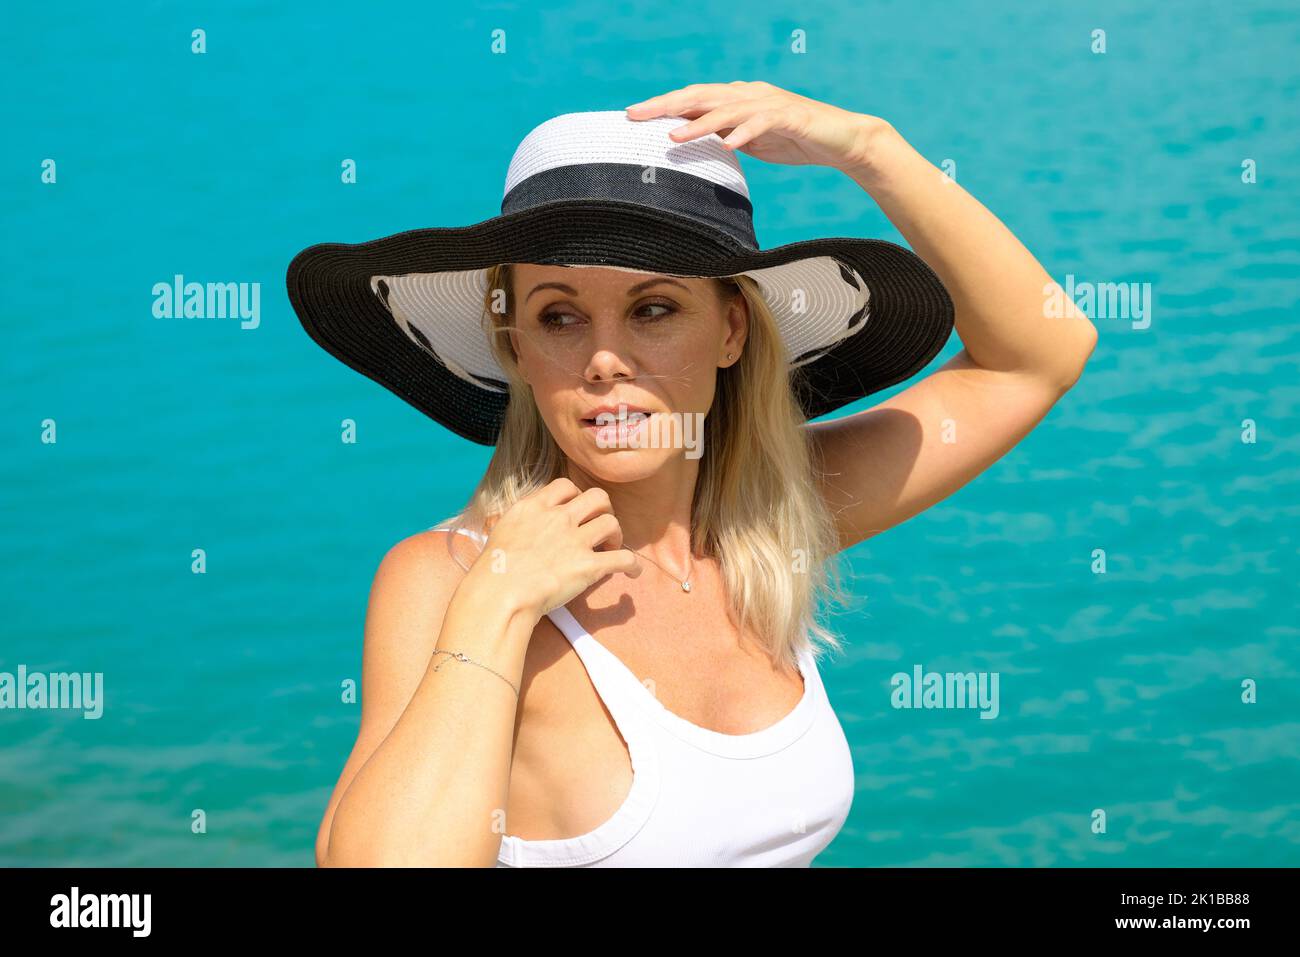 Attractive blond woman smiling friendly wearing a black and white summer hat in a white top with her hands on the hat in front of a turquoise sea Stock Photo